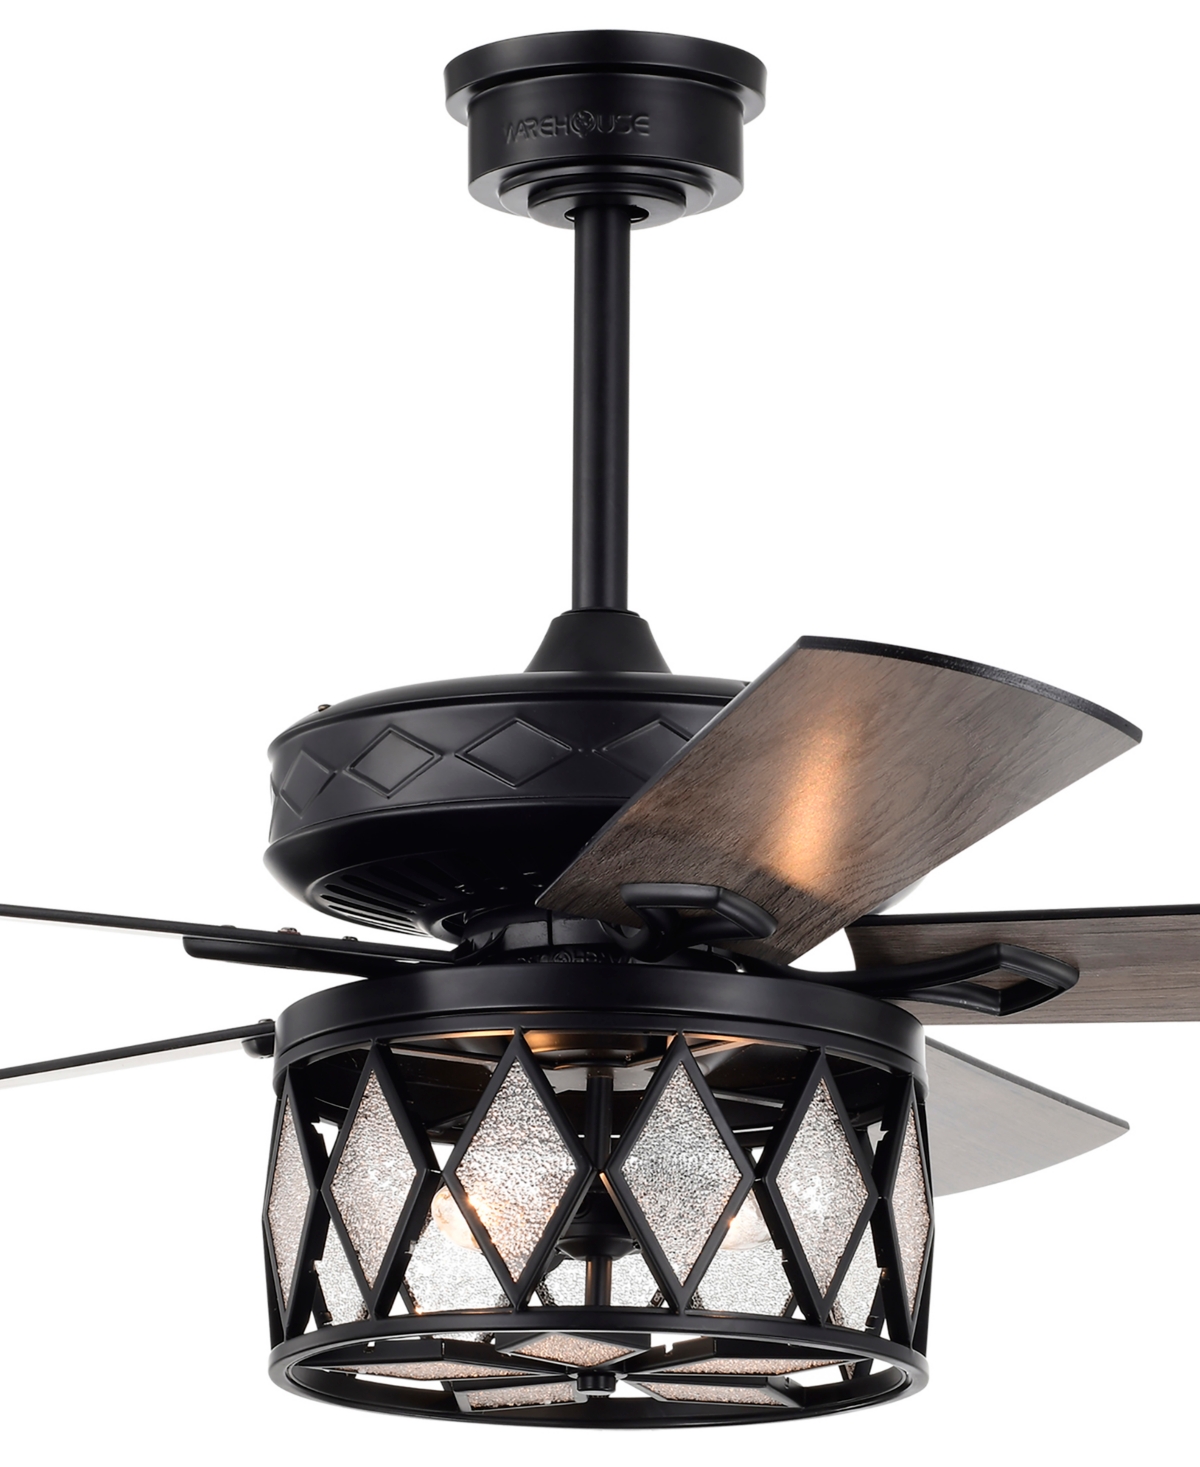 Home Accessories Jescha 52" 2-light Indoor Ceiling Fan With Light Kit And Remote In Matte Black